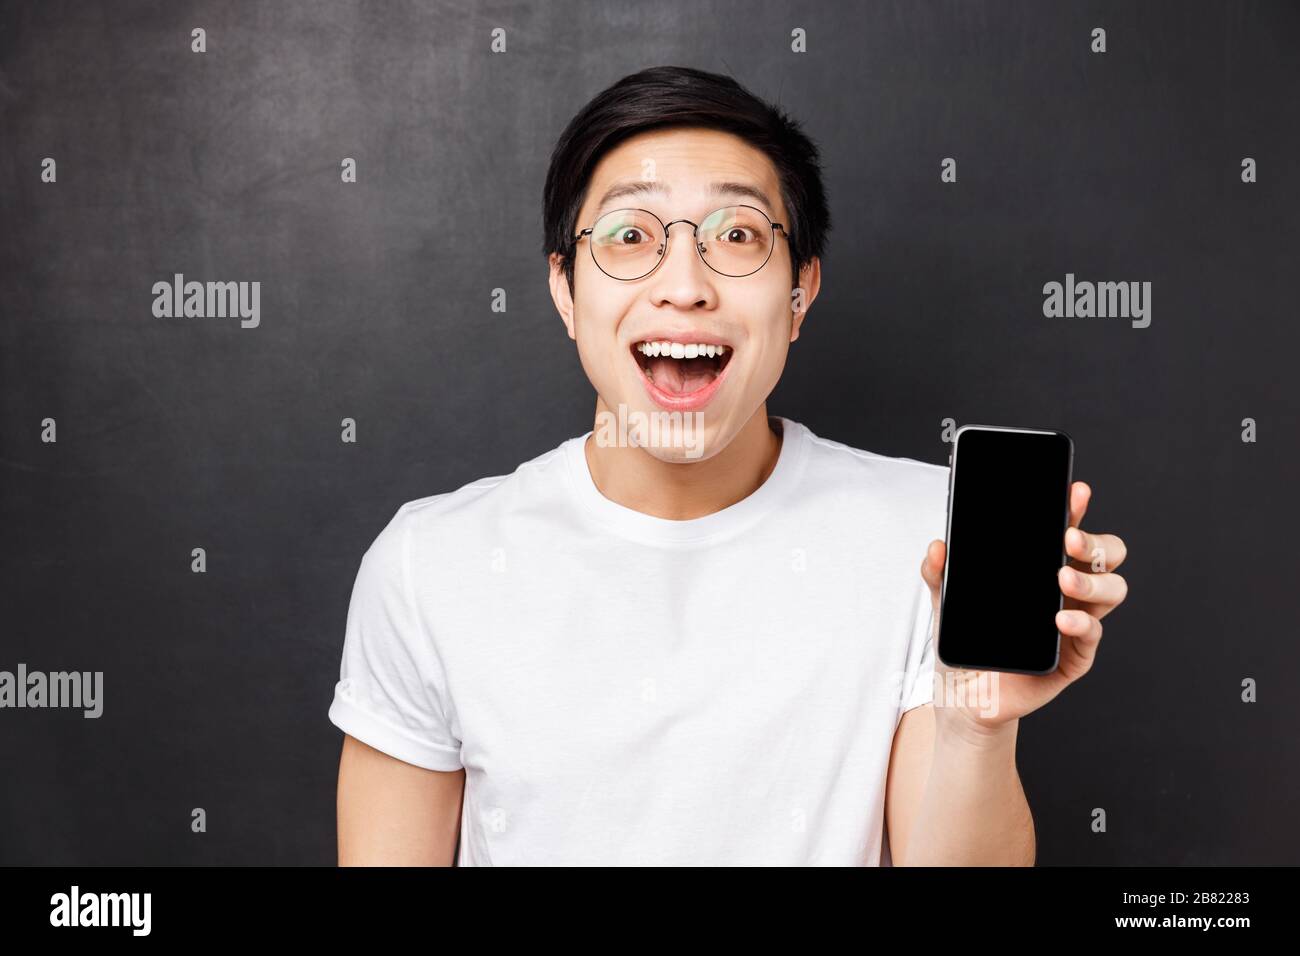 Technology, messaging and people concept. Close-up portrait of happy, surprised and impressed young excited asian man in white t-shirt, showing Stock Photo